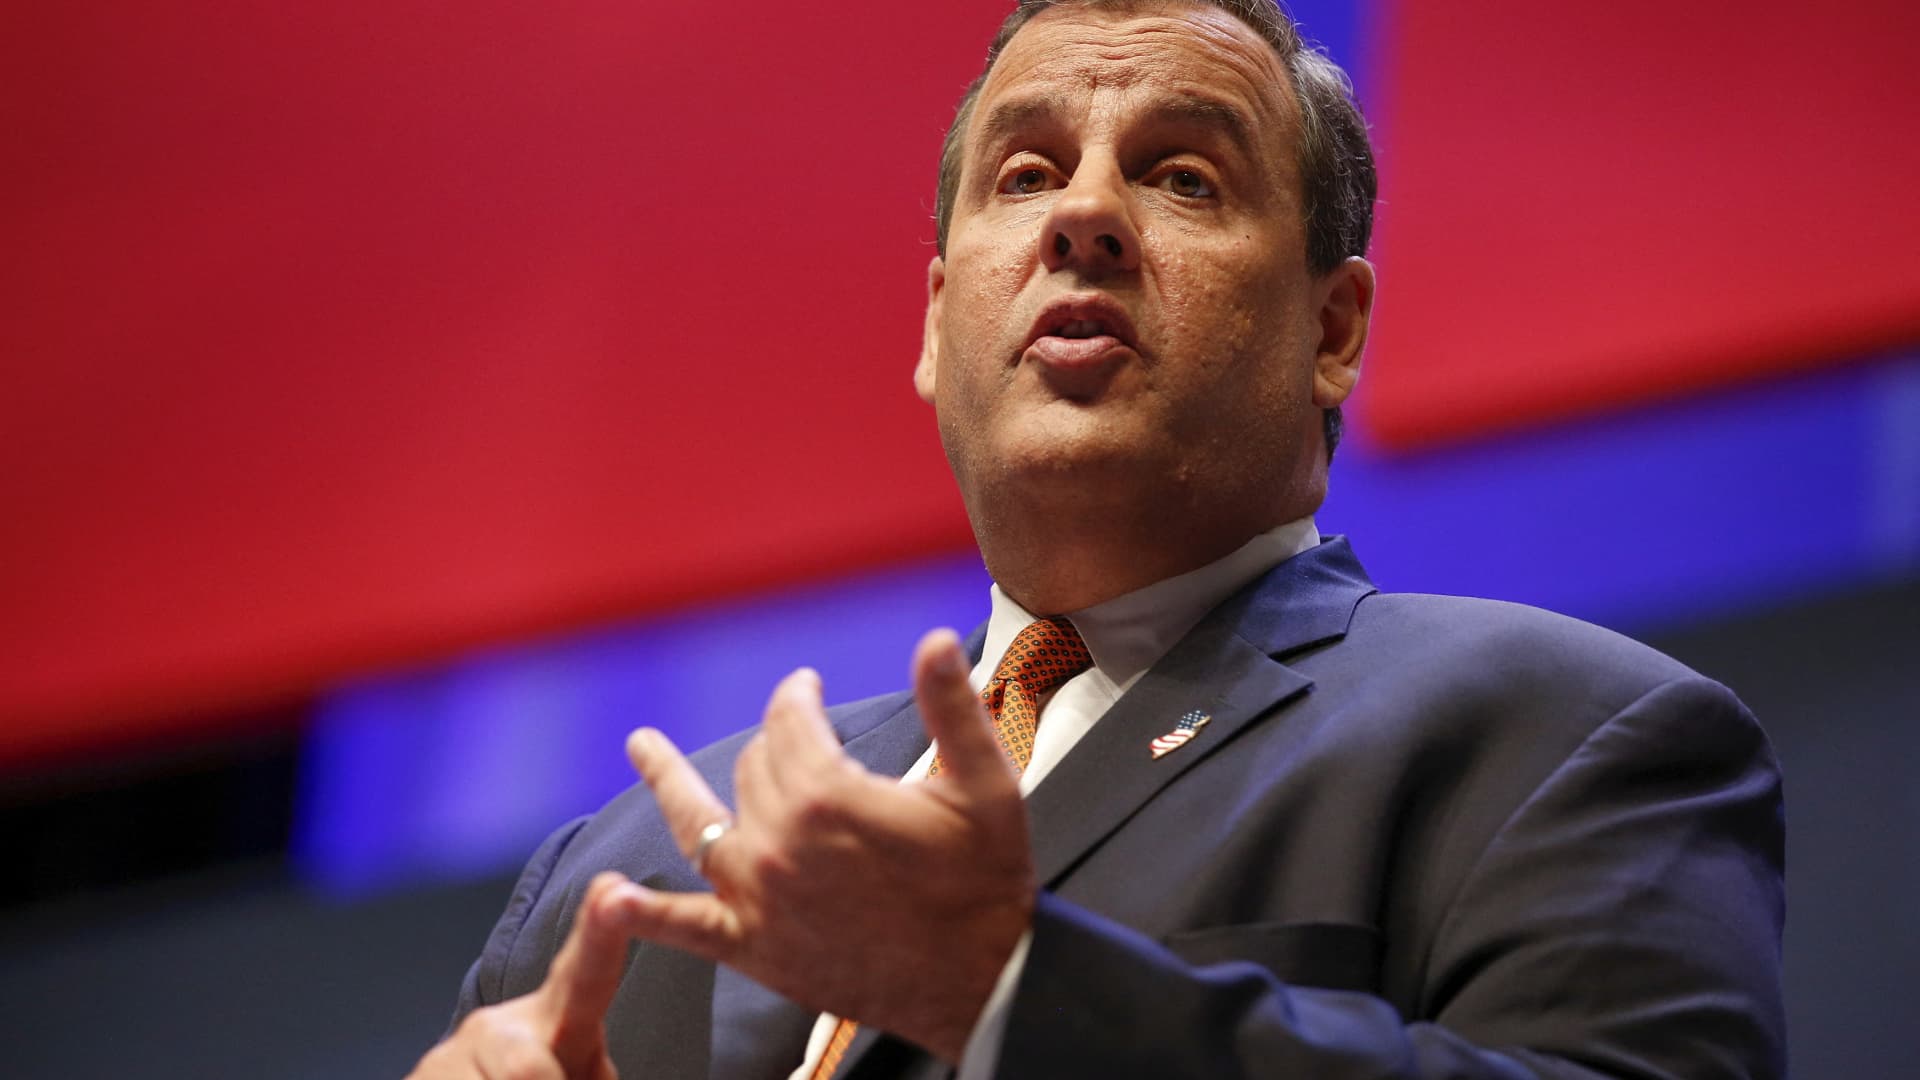 Former New Jersey Gov. Chris Christie, a top GOP Trump critic, launches 2024 presidential campaign